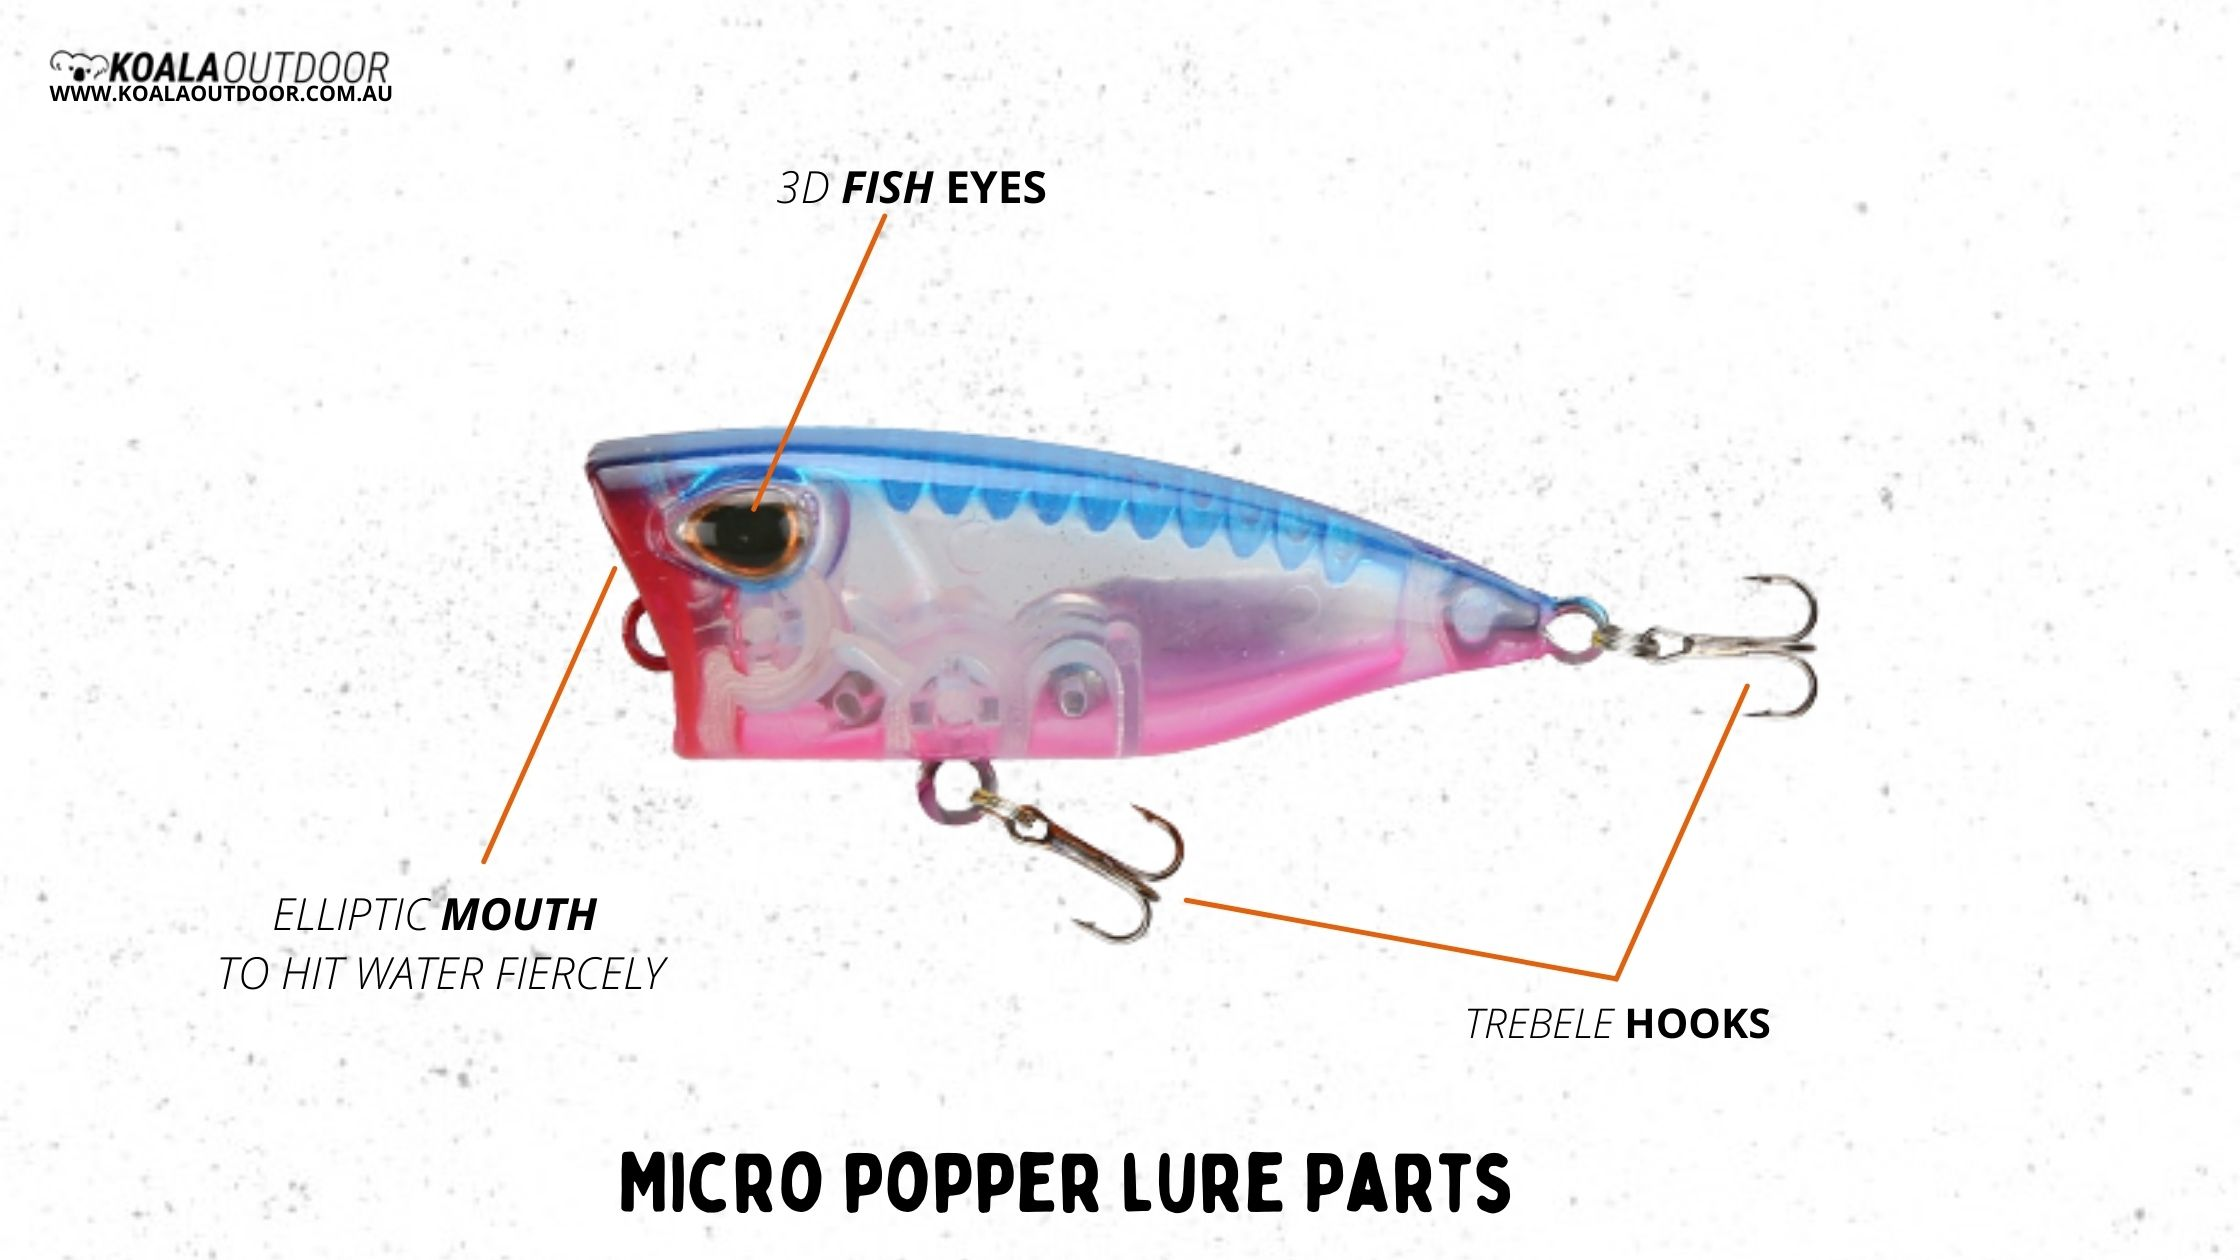 Micro Popper Lures - Everything You Need to Know!